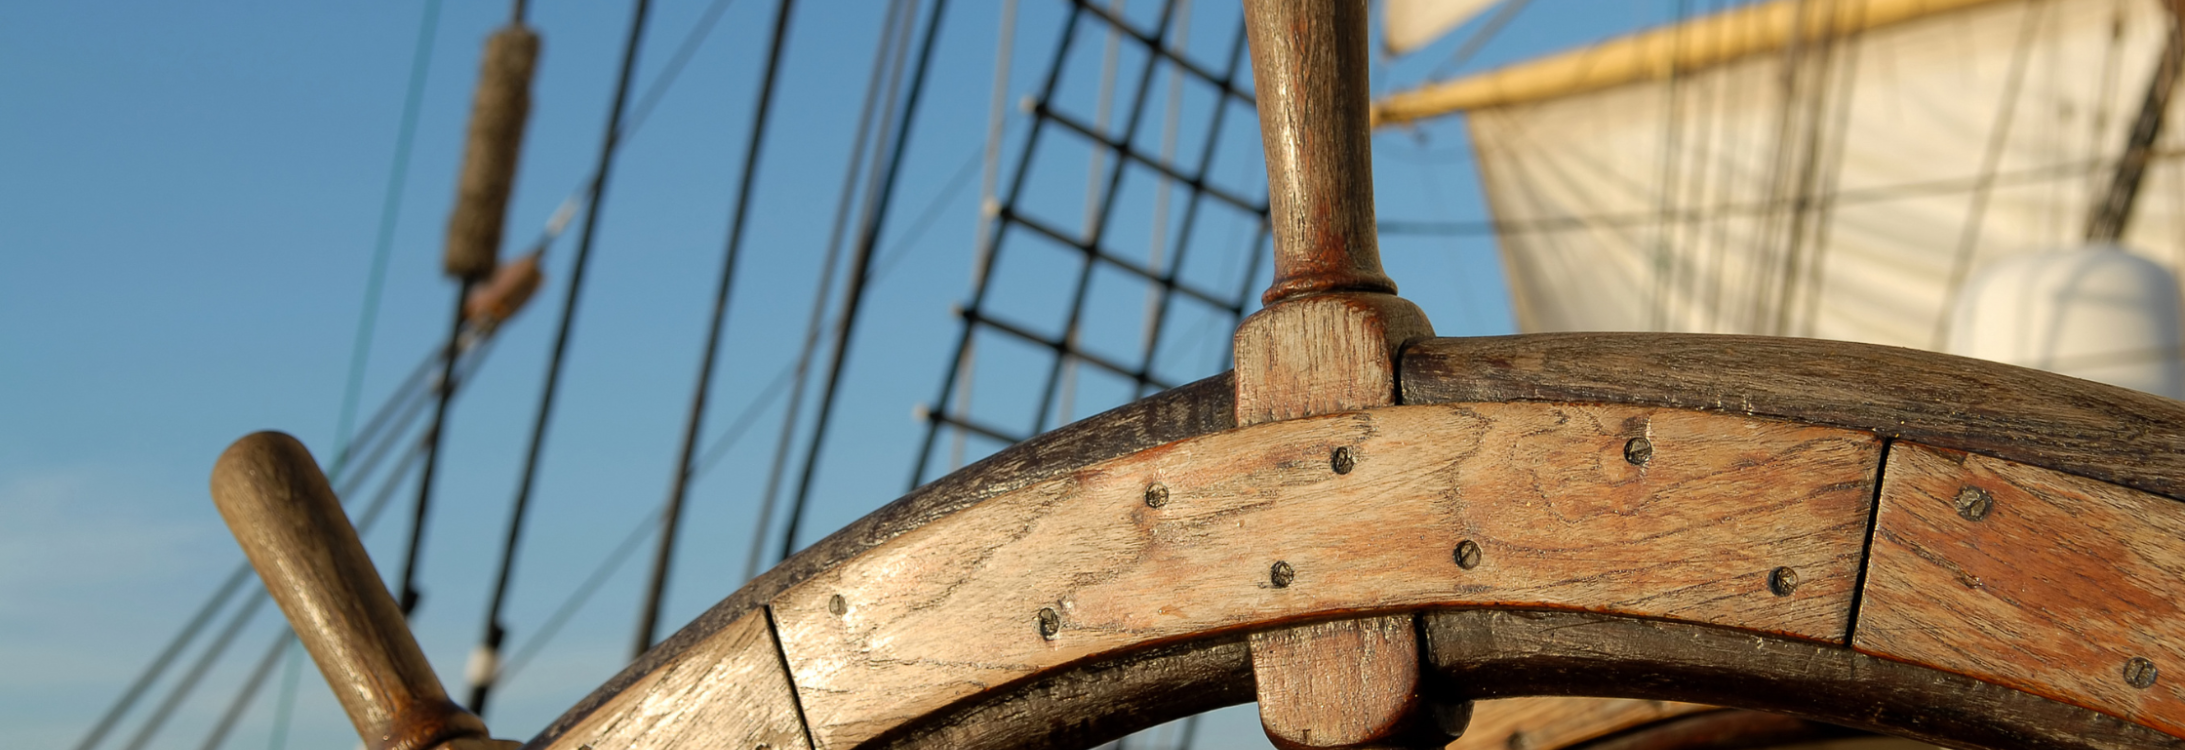 Are you ready to thrive blog cover - pirate ship